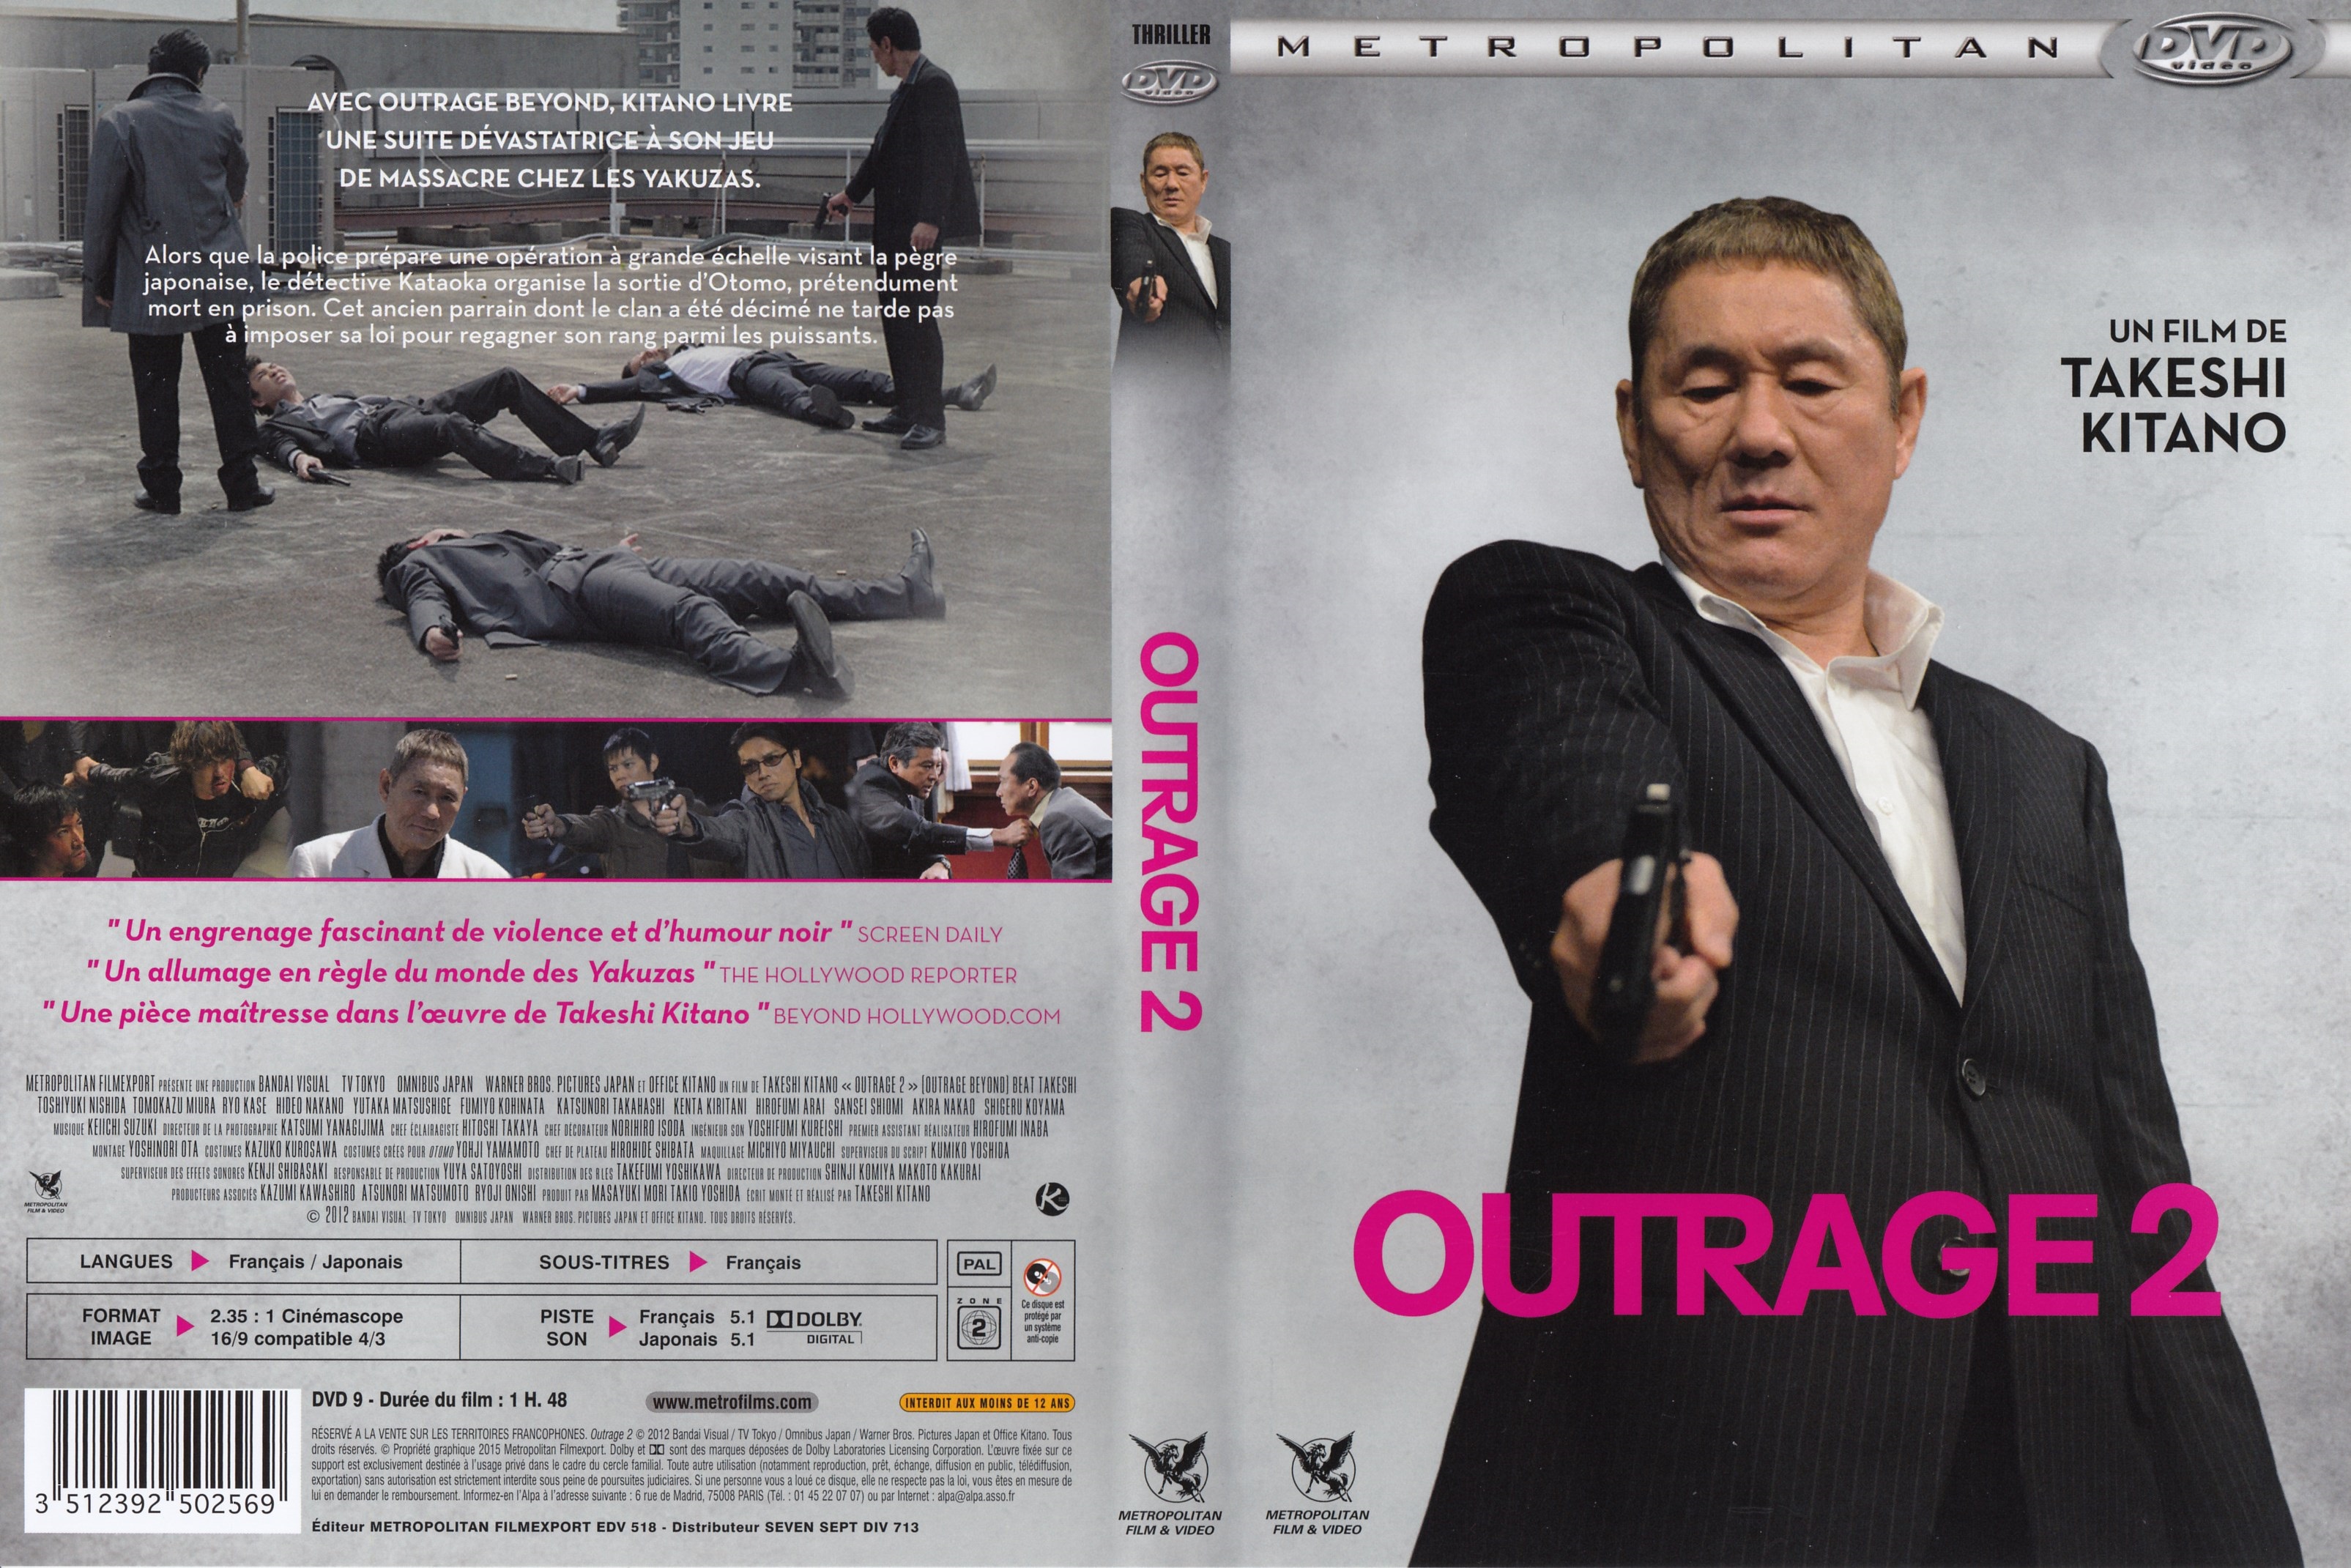 Jaquette DVD Outrage 2